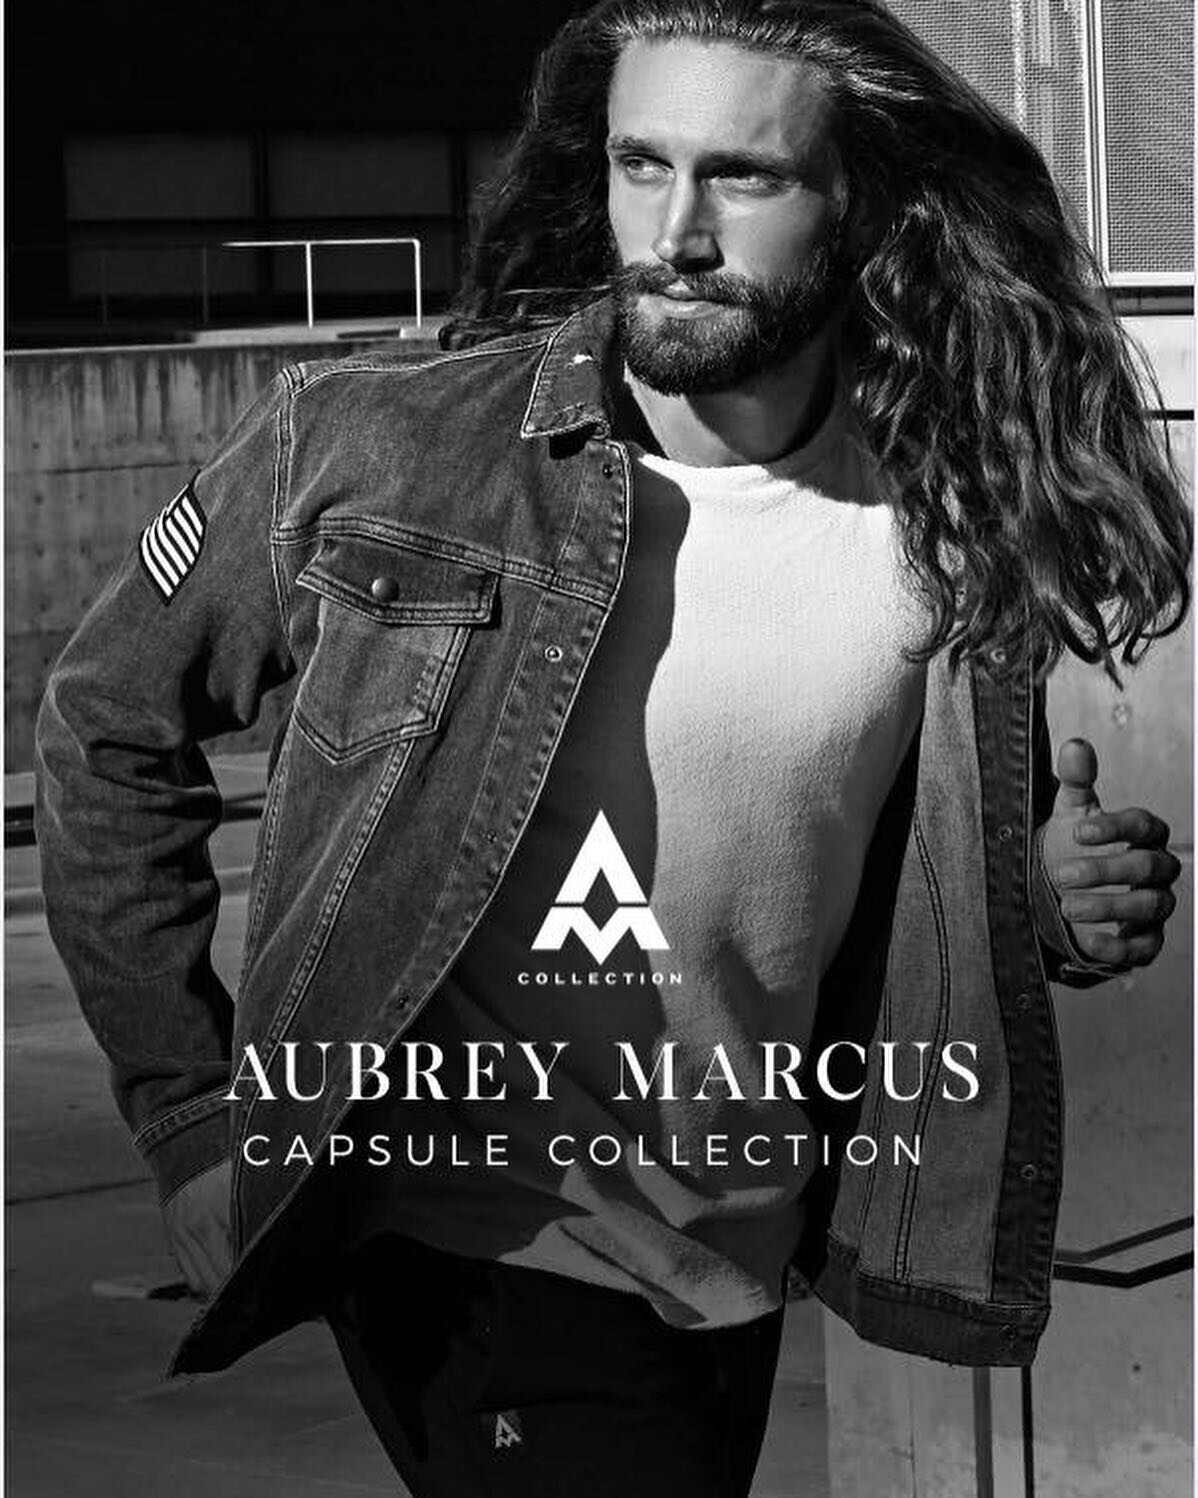 One more little shout out to the guys! Here is a collection of images from the @aubreymarcuscollection campaign I shot with @peaceoot ! My favorite images from the collection are earlier in my profile.
.
.
.
#menswear #mensfashion #menstyle #menstyle